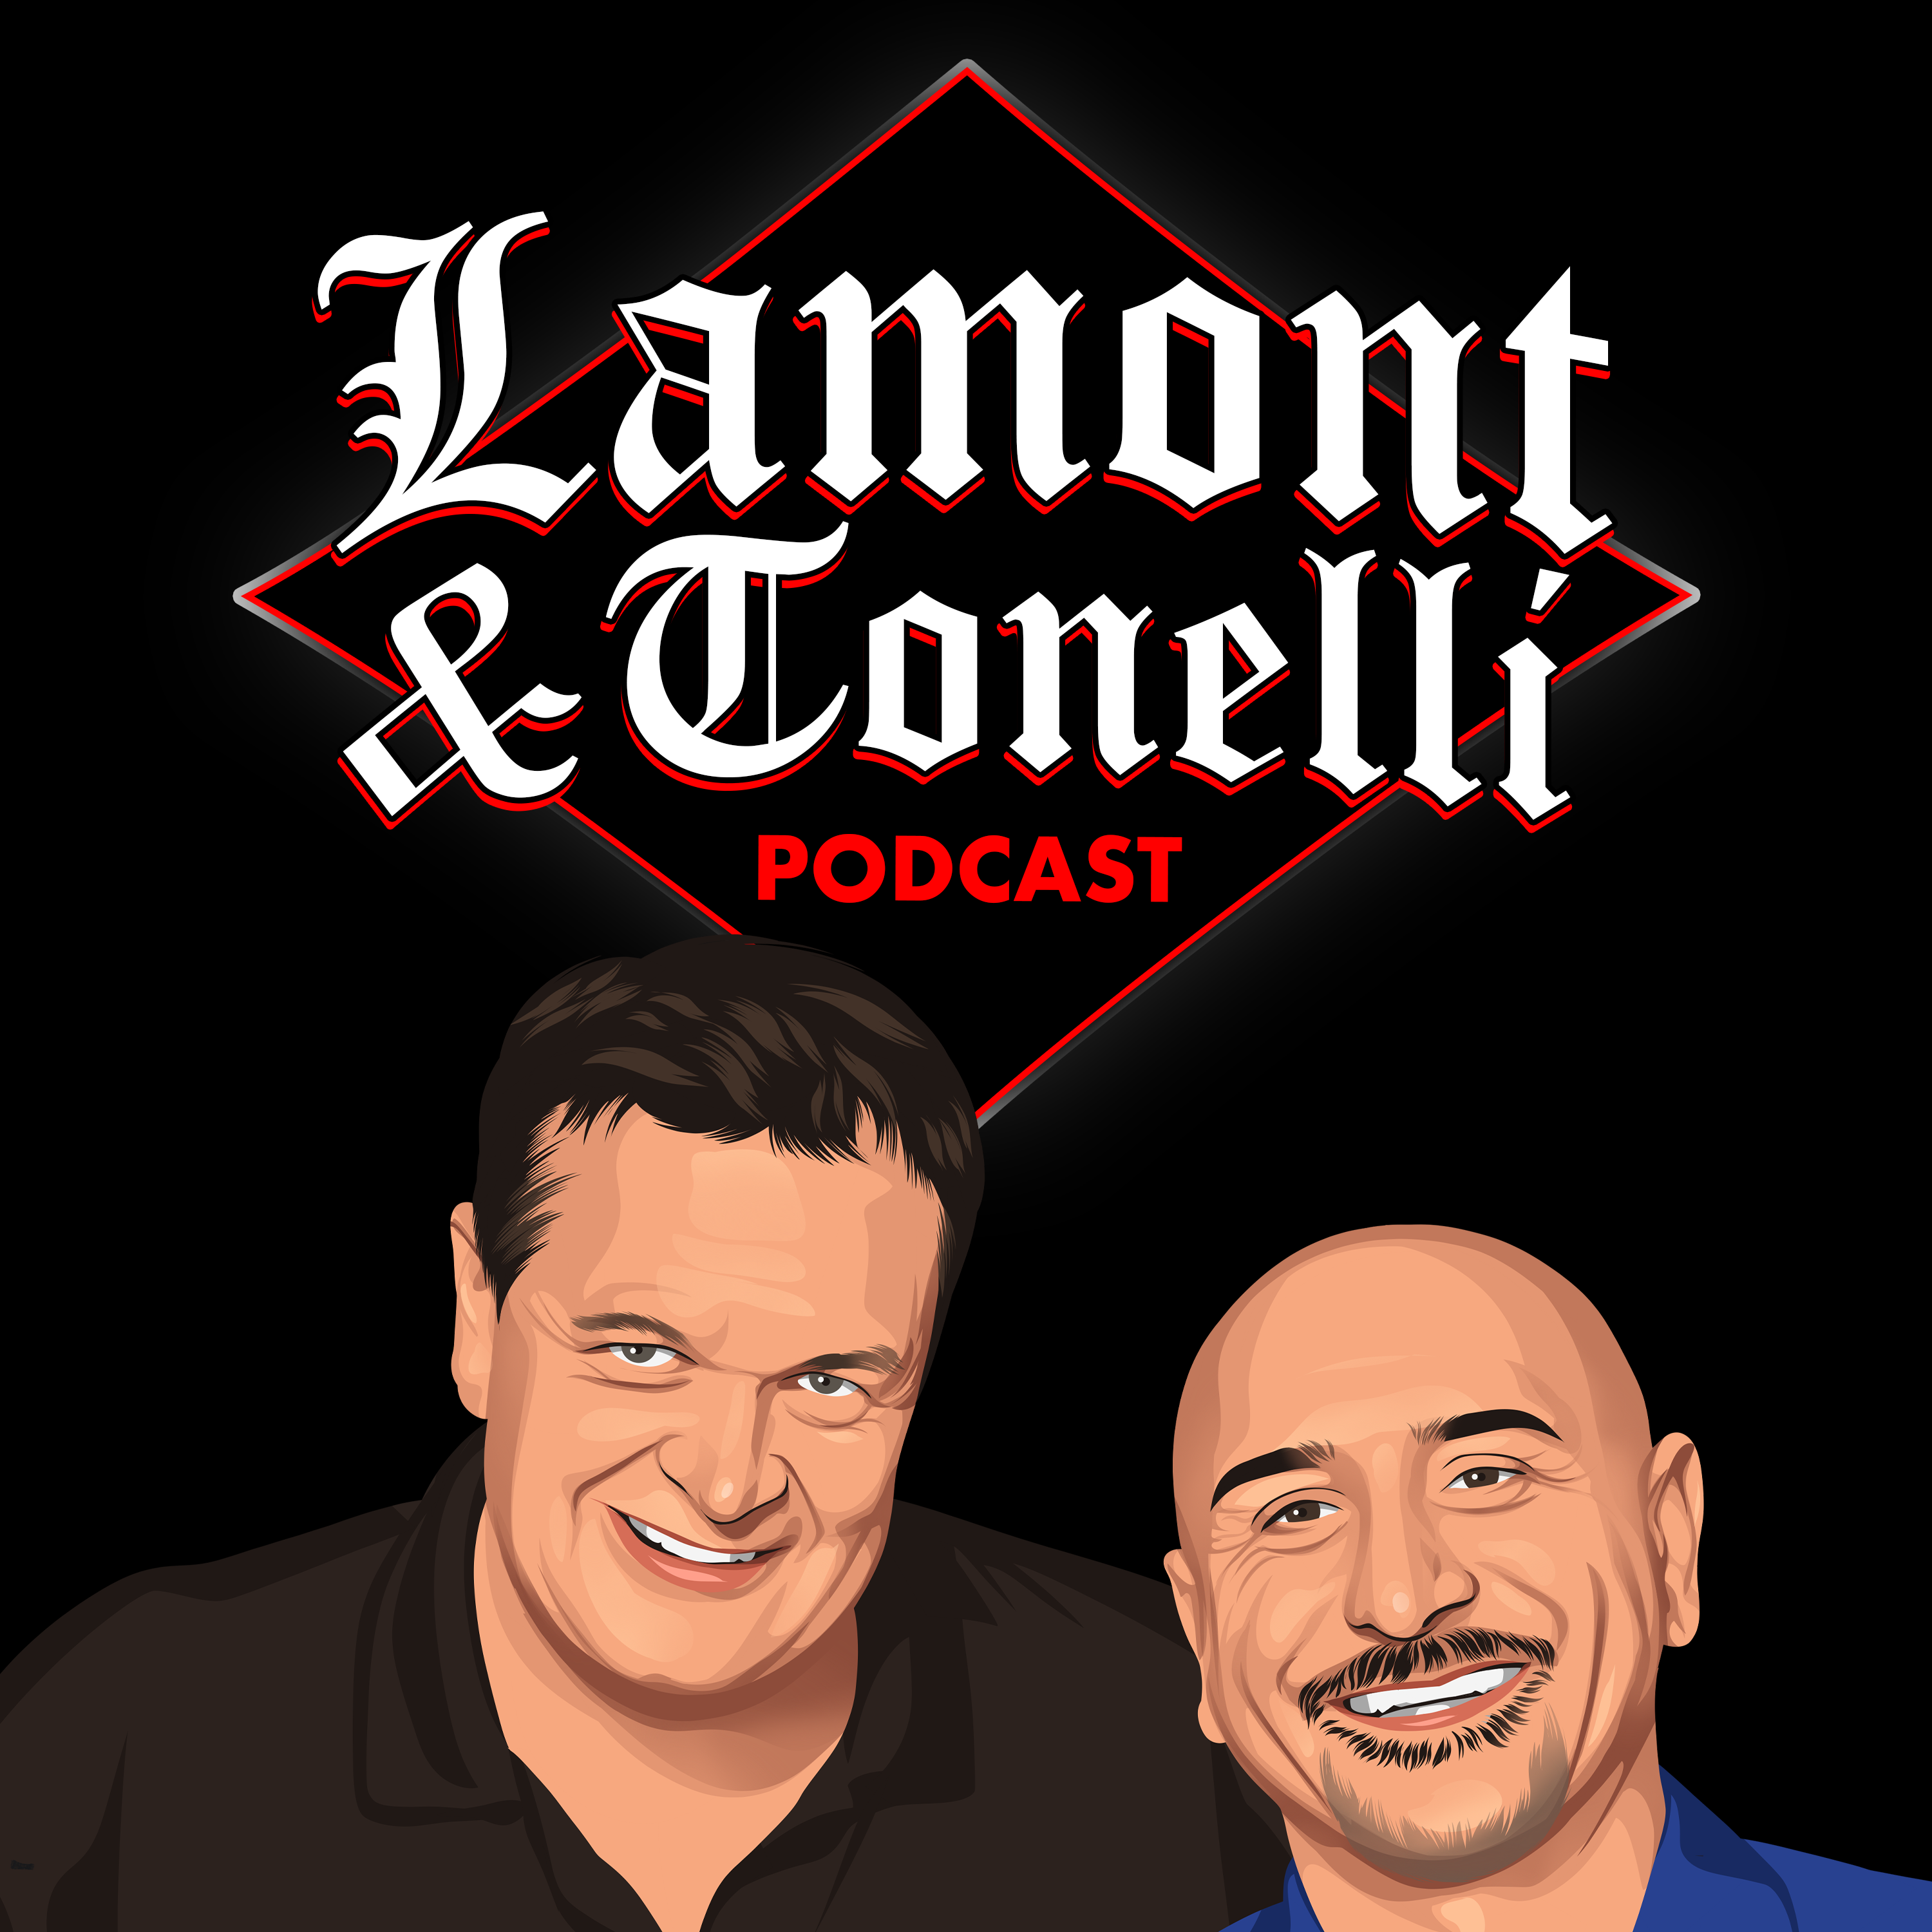 Lamont & Tonelli Talk About Tesla's Recall With Elon Musk